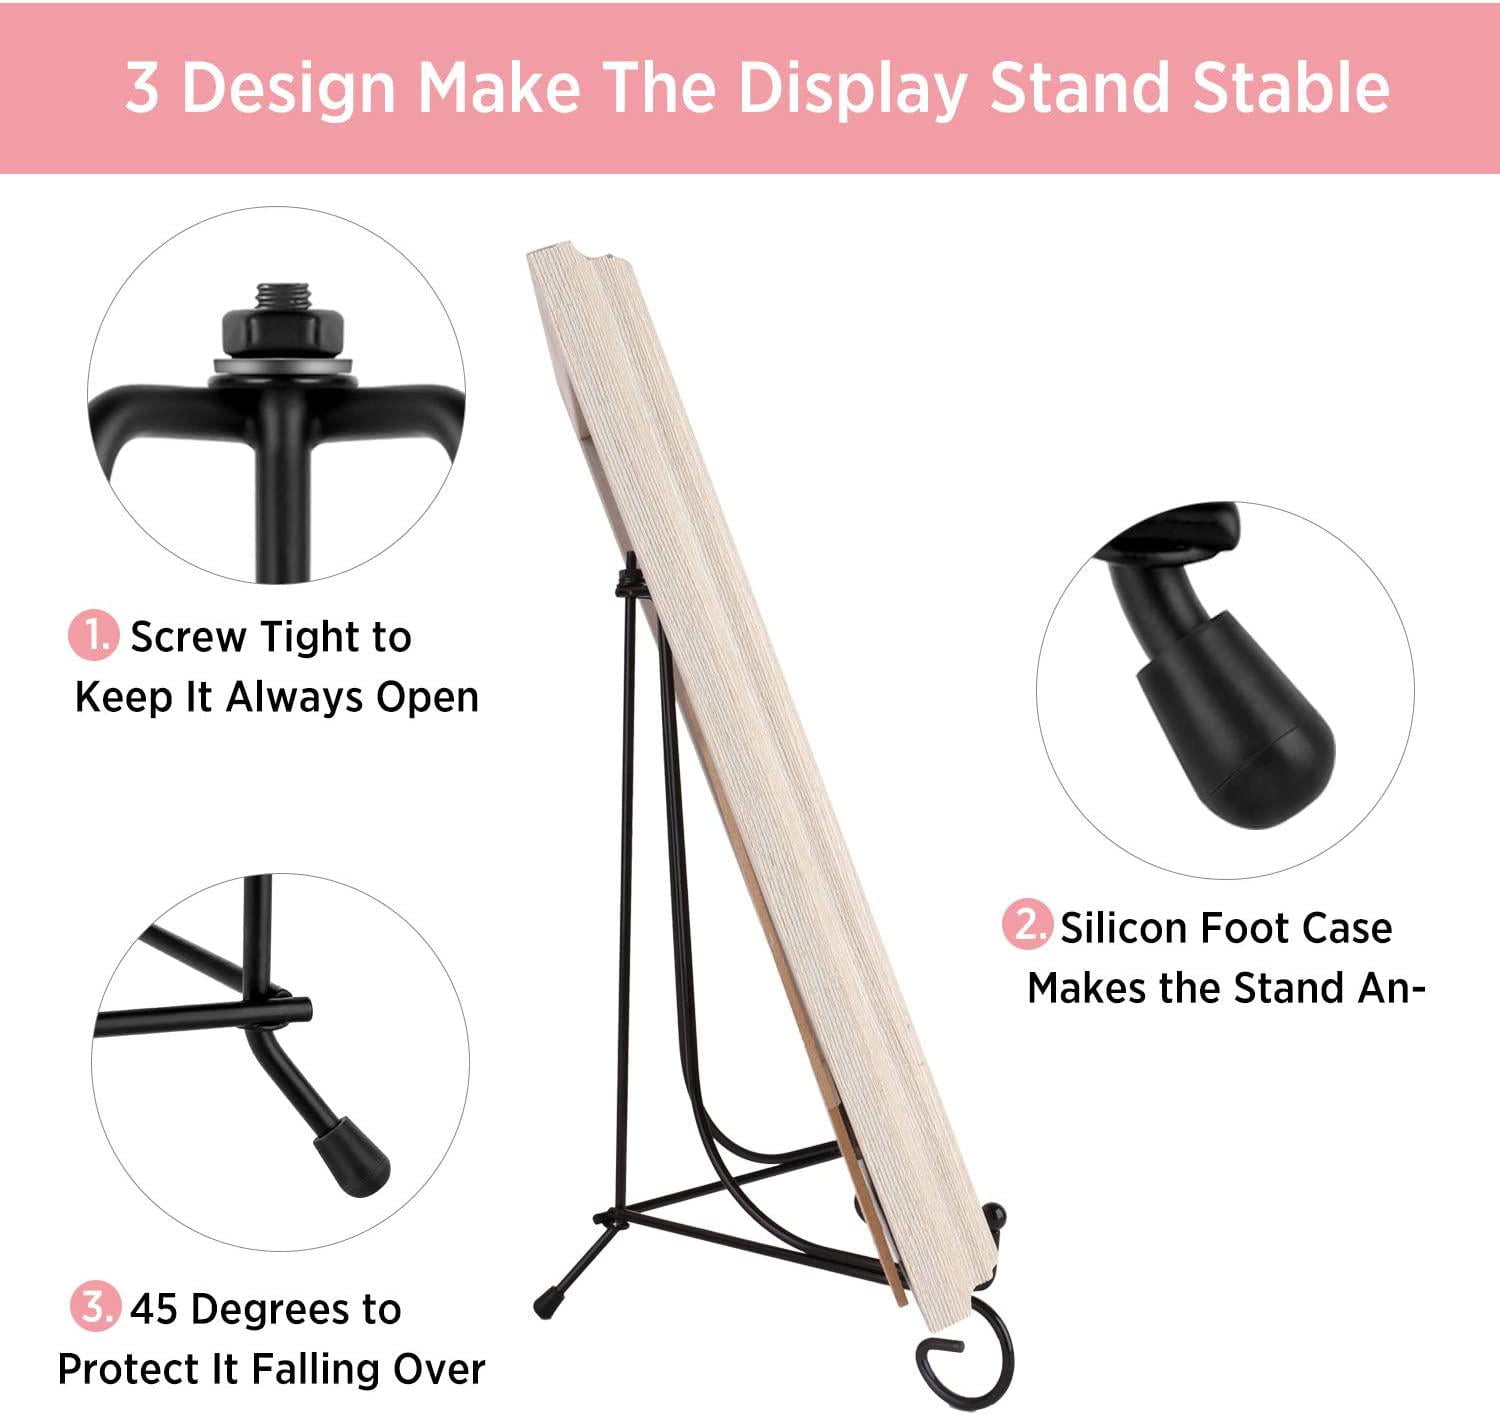 Picture Frame Holder Stand Book Display Stand Easel Display Stand Teamkio 2 Pack Improved Anti-Slip 10 Inch Plate Holder Display Stand